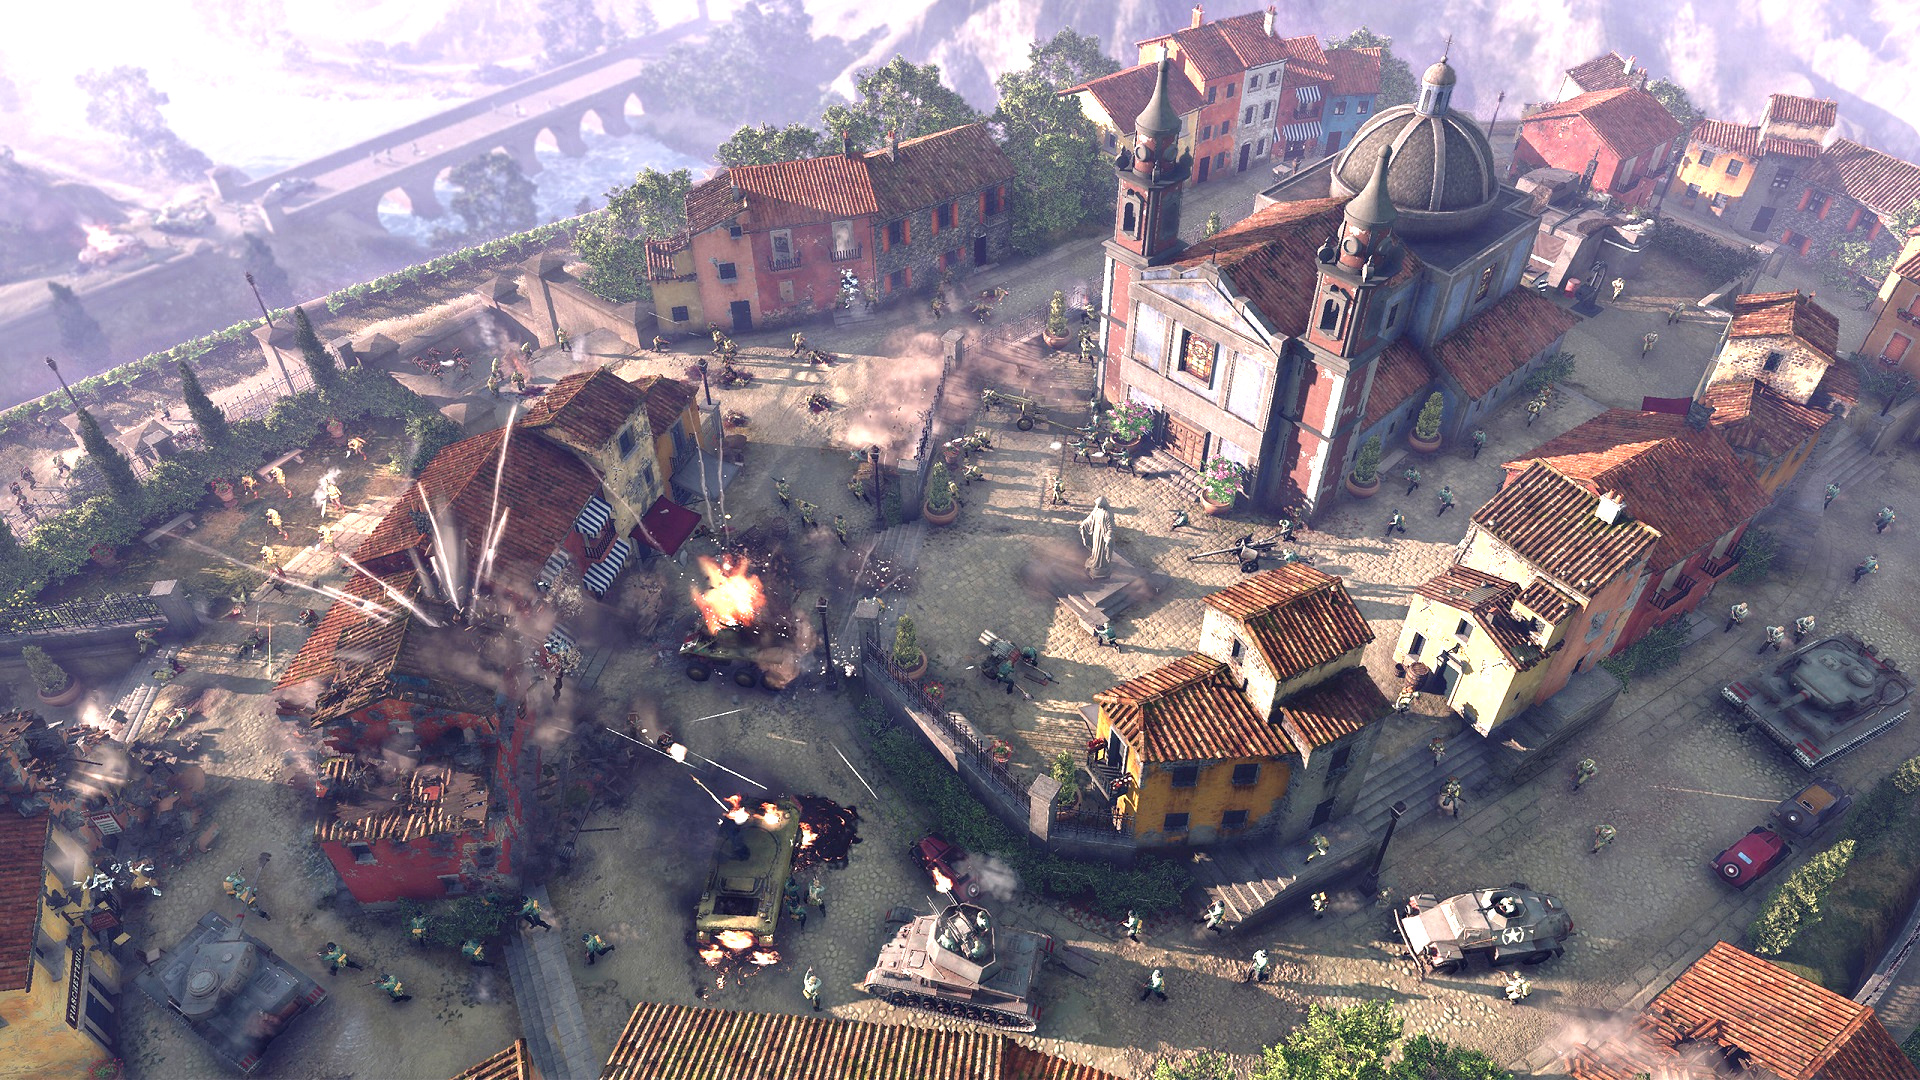 The Company of Heroes 3 pre-alpha has been modded so you can play as Germany